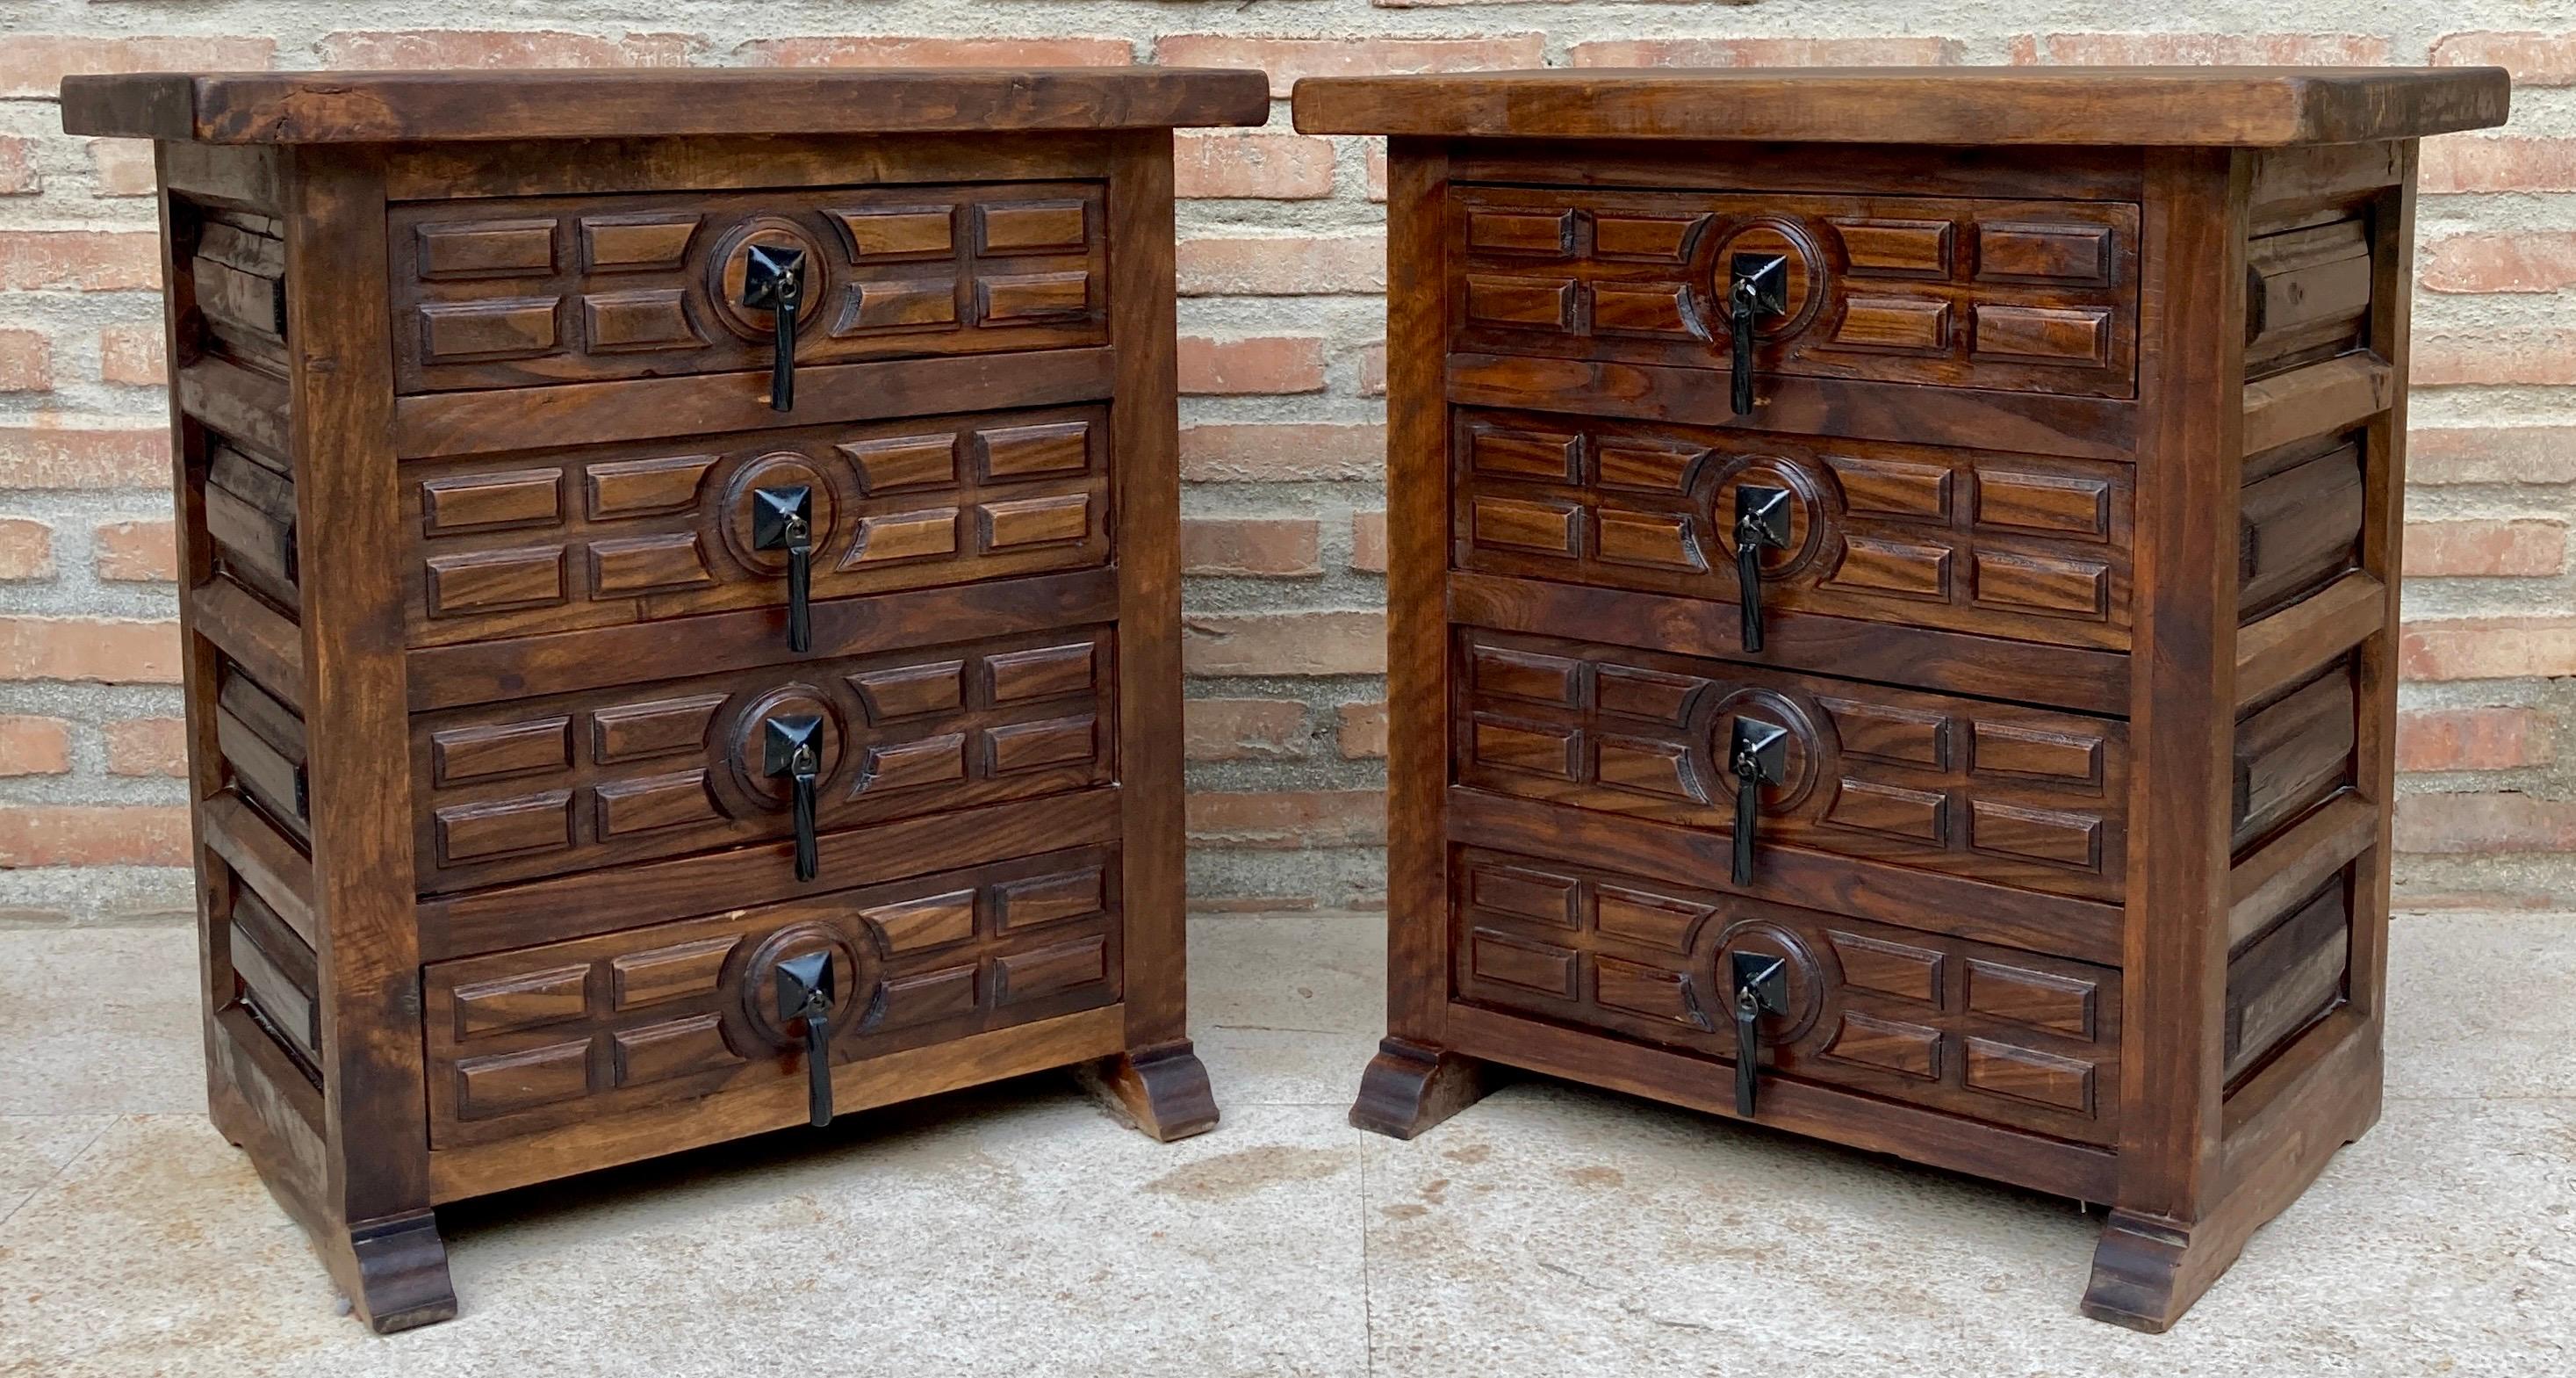 Pair of 20th century Spanish bedside tables with four drawers and fittings.
Beautiful tables that can be used as bedside tables or side tables, side tables... or table lamp.
design time from 1950 to 1959
production period 1950 to 1959
Style